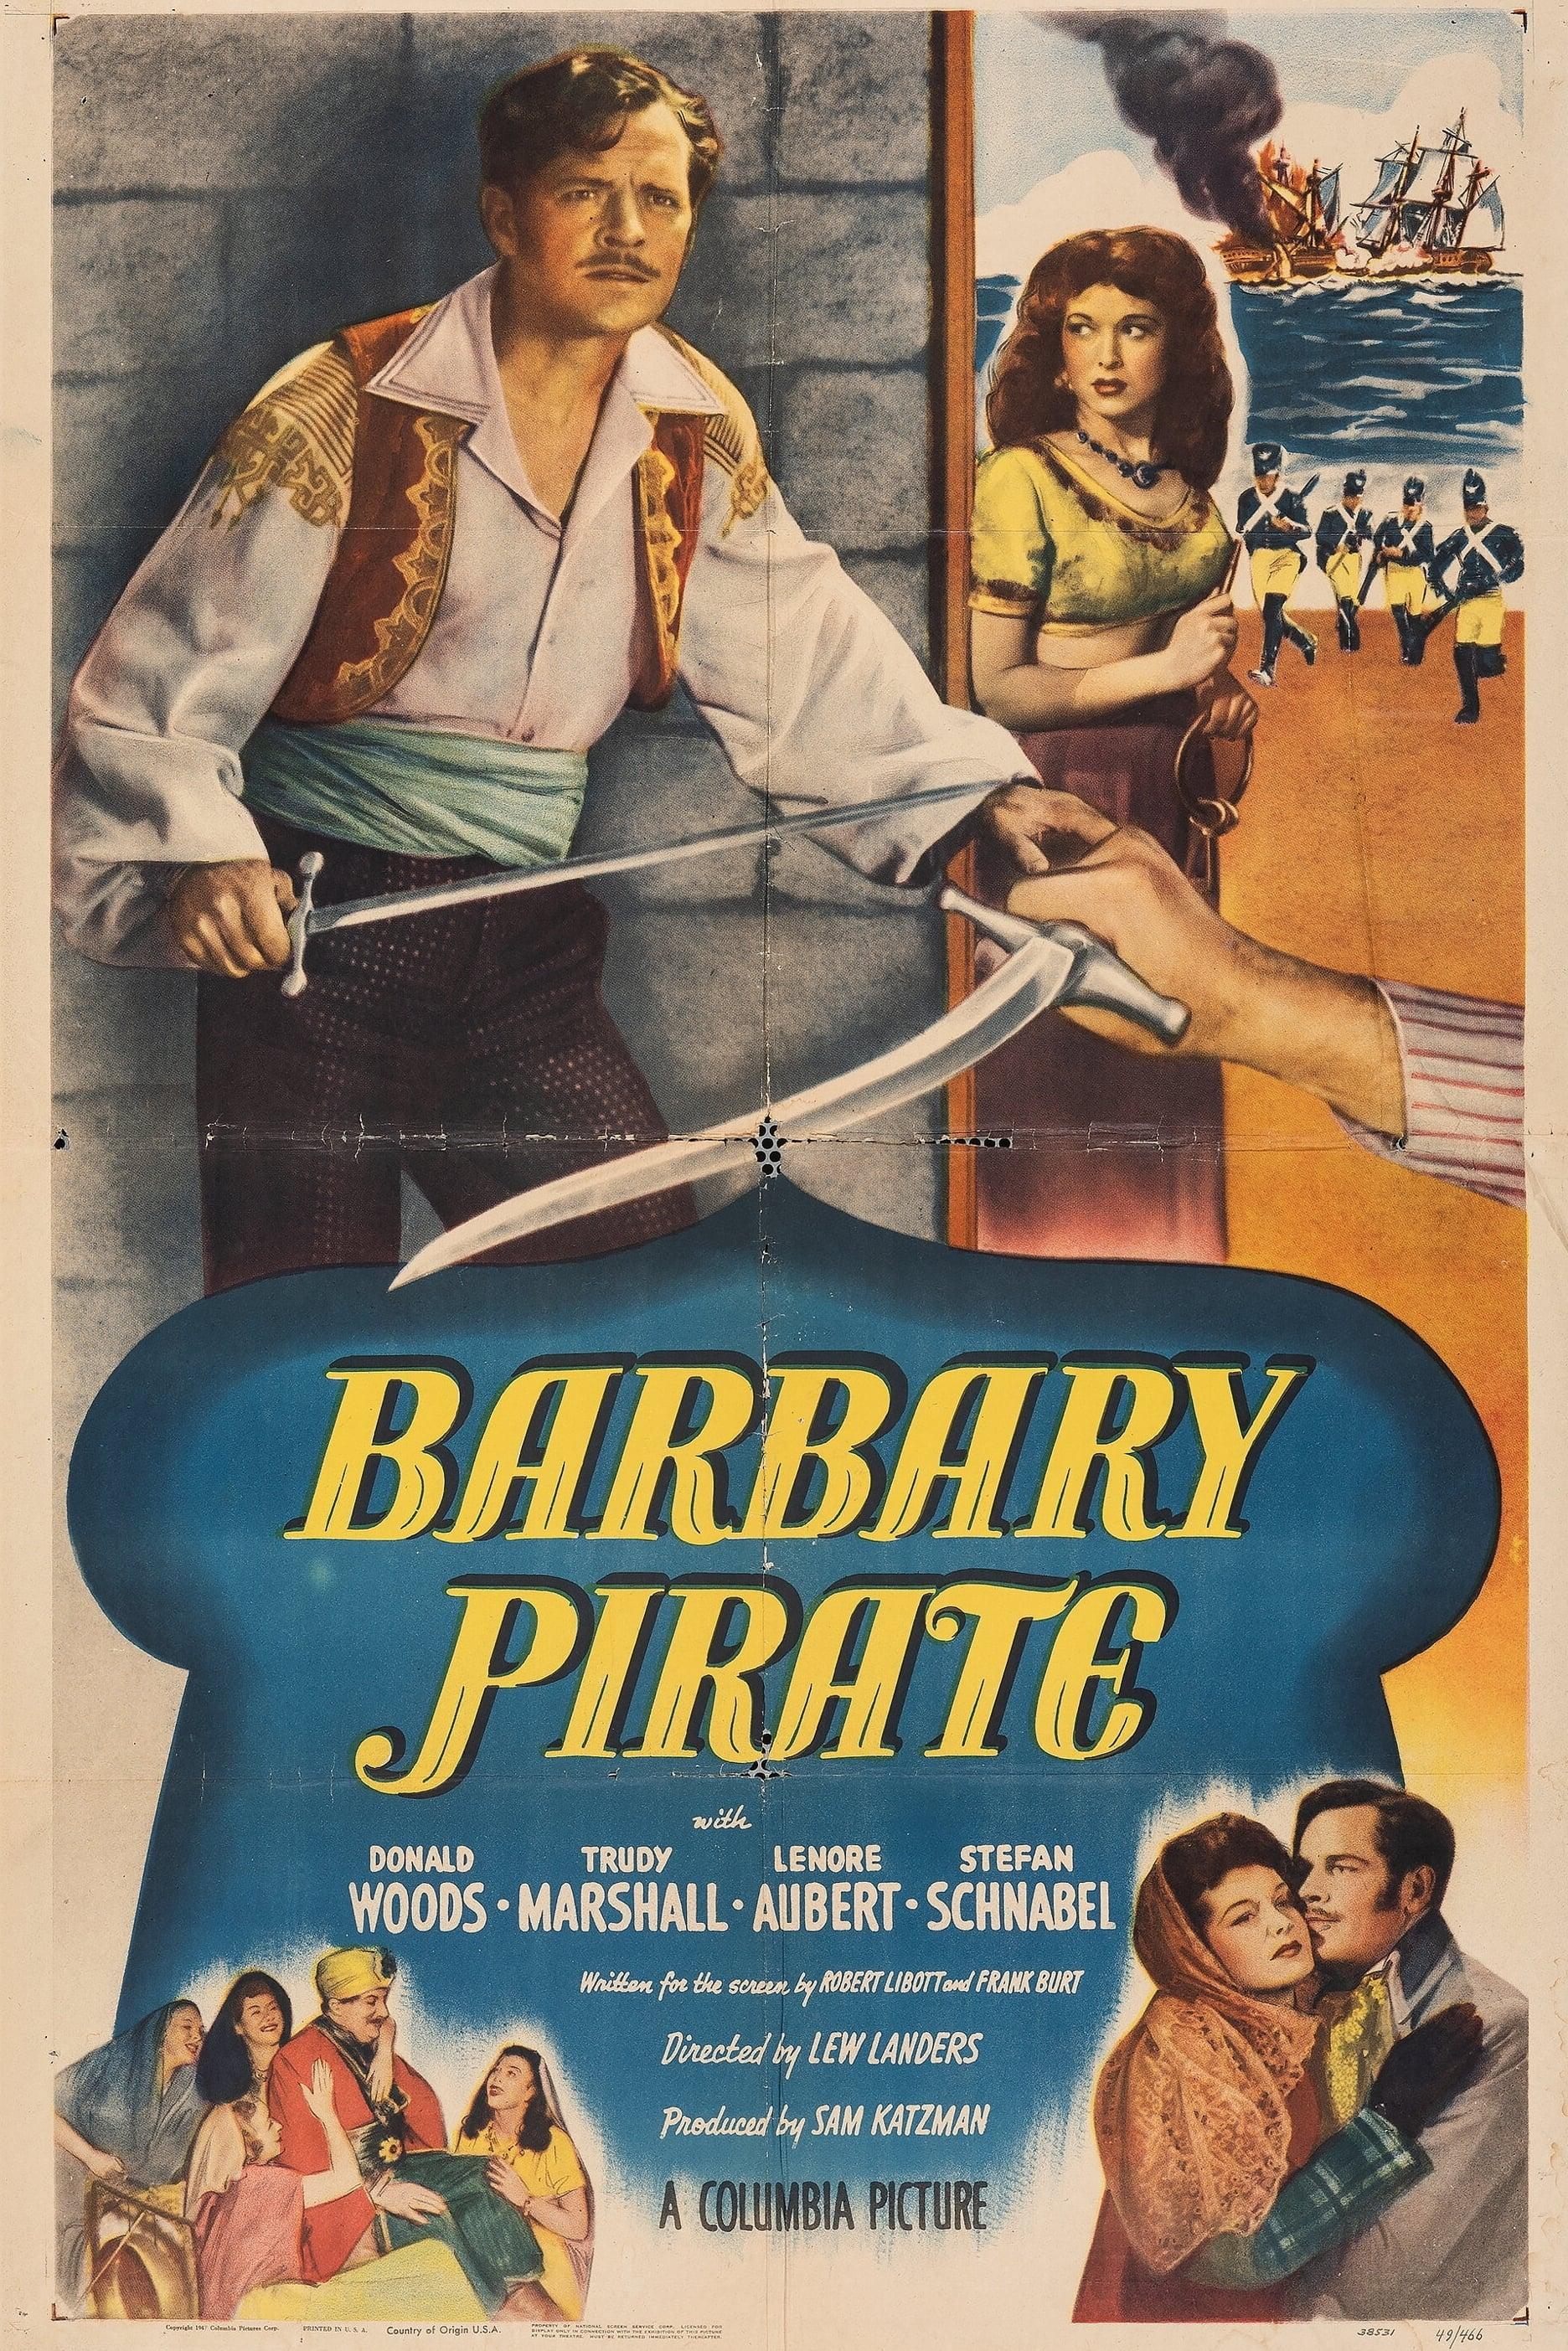 Barbary Pirate poster